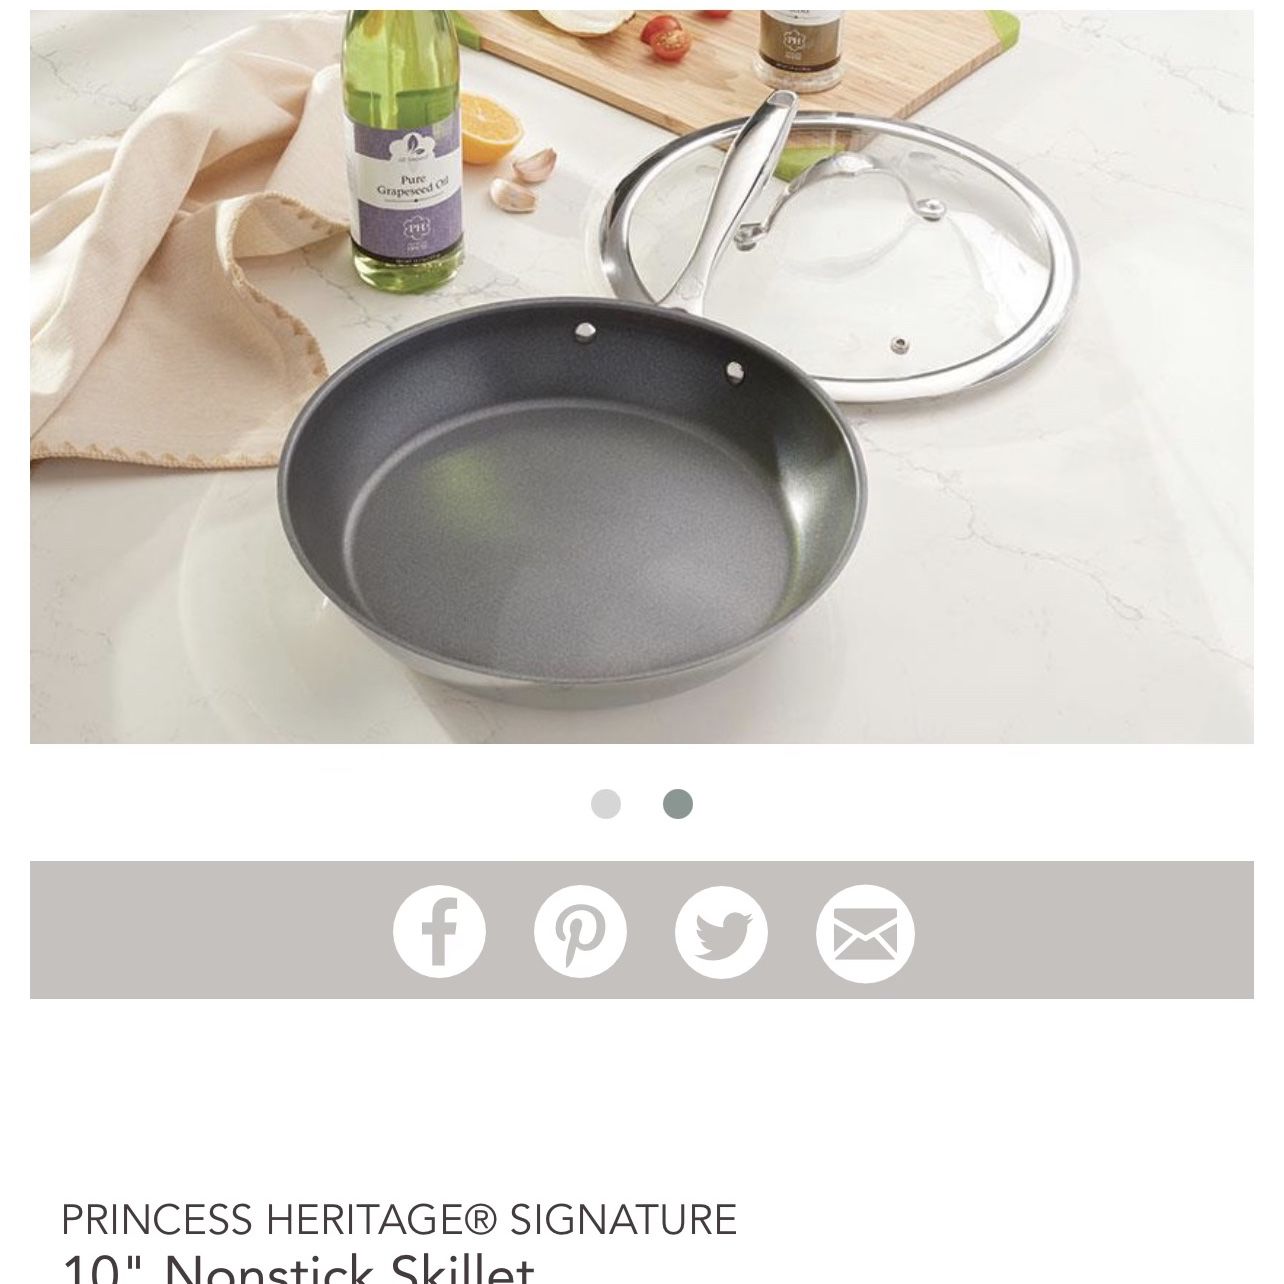 Masterclass Pan Healthy Options 8” Skillet ( 2 Pack ) for Sale in Stockton,  CA - OfferUp